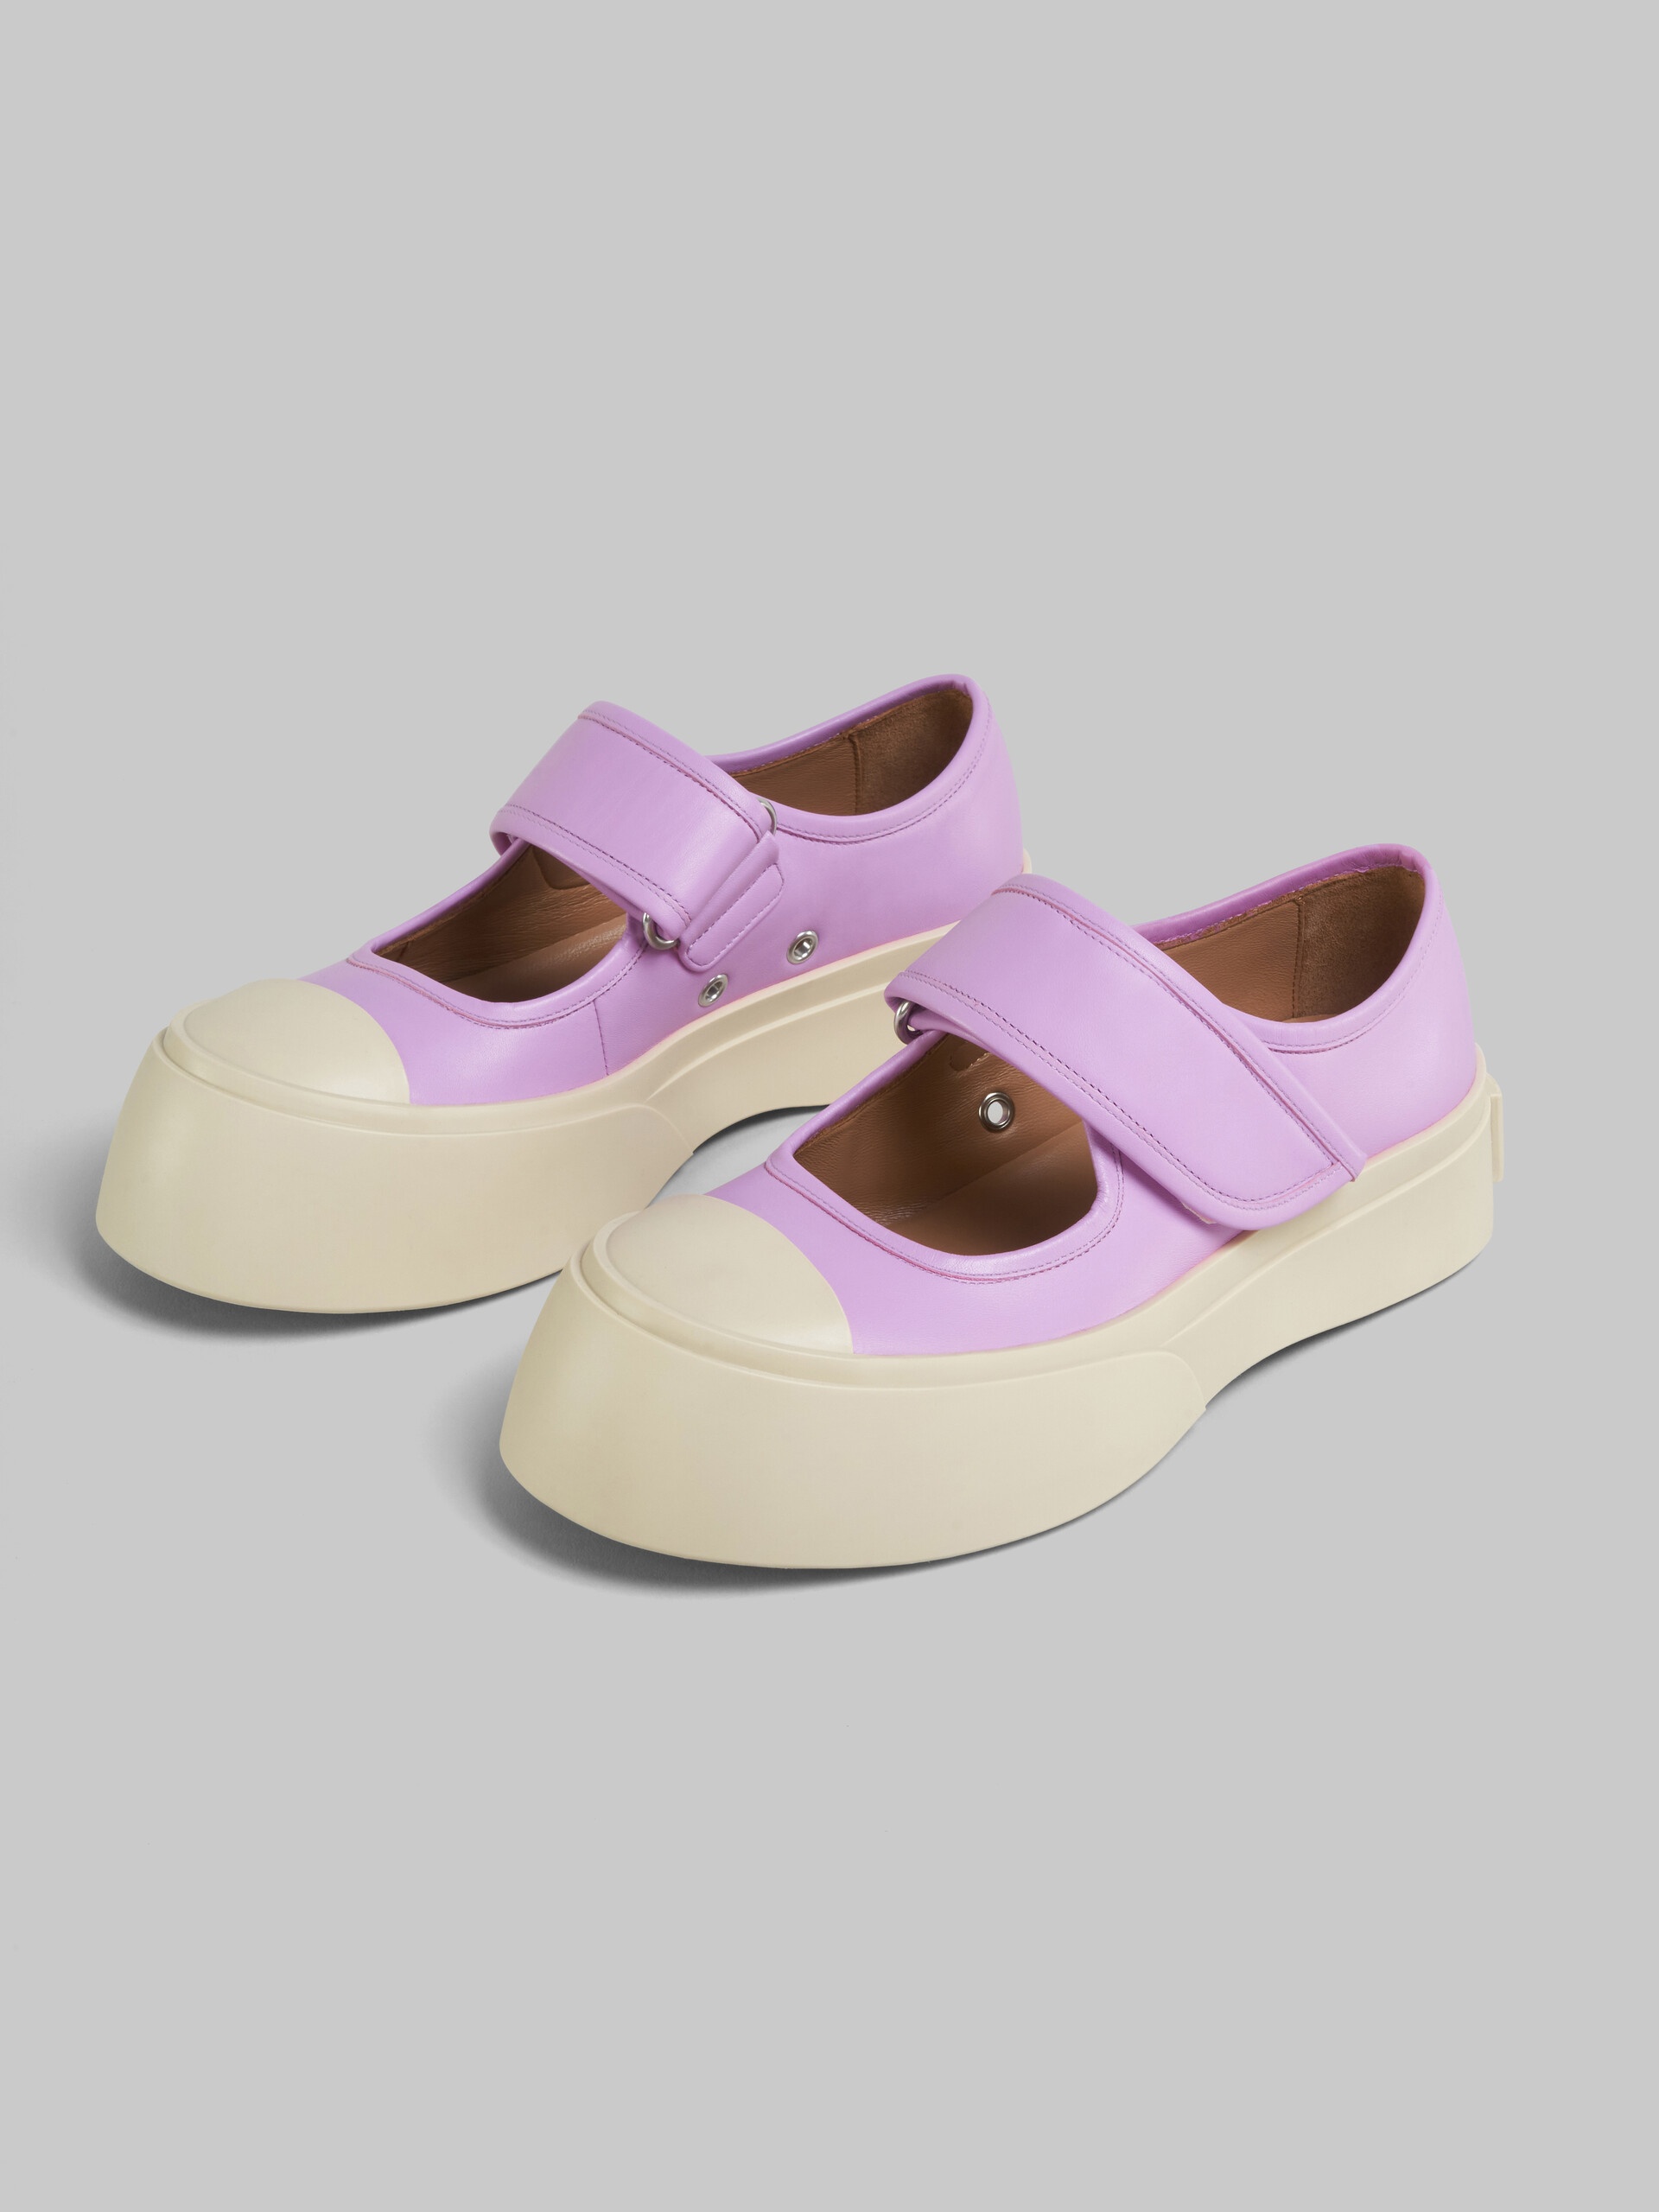 LILAC NAPPA LEATHER MARY JANE SNEAKER - 5